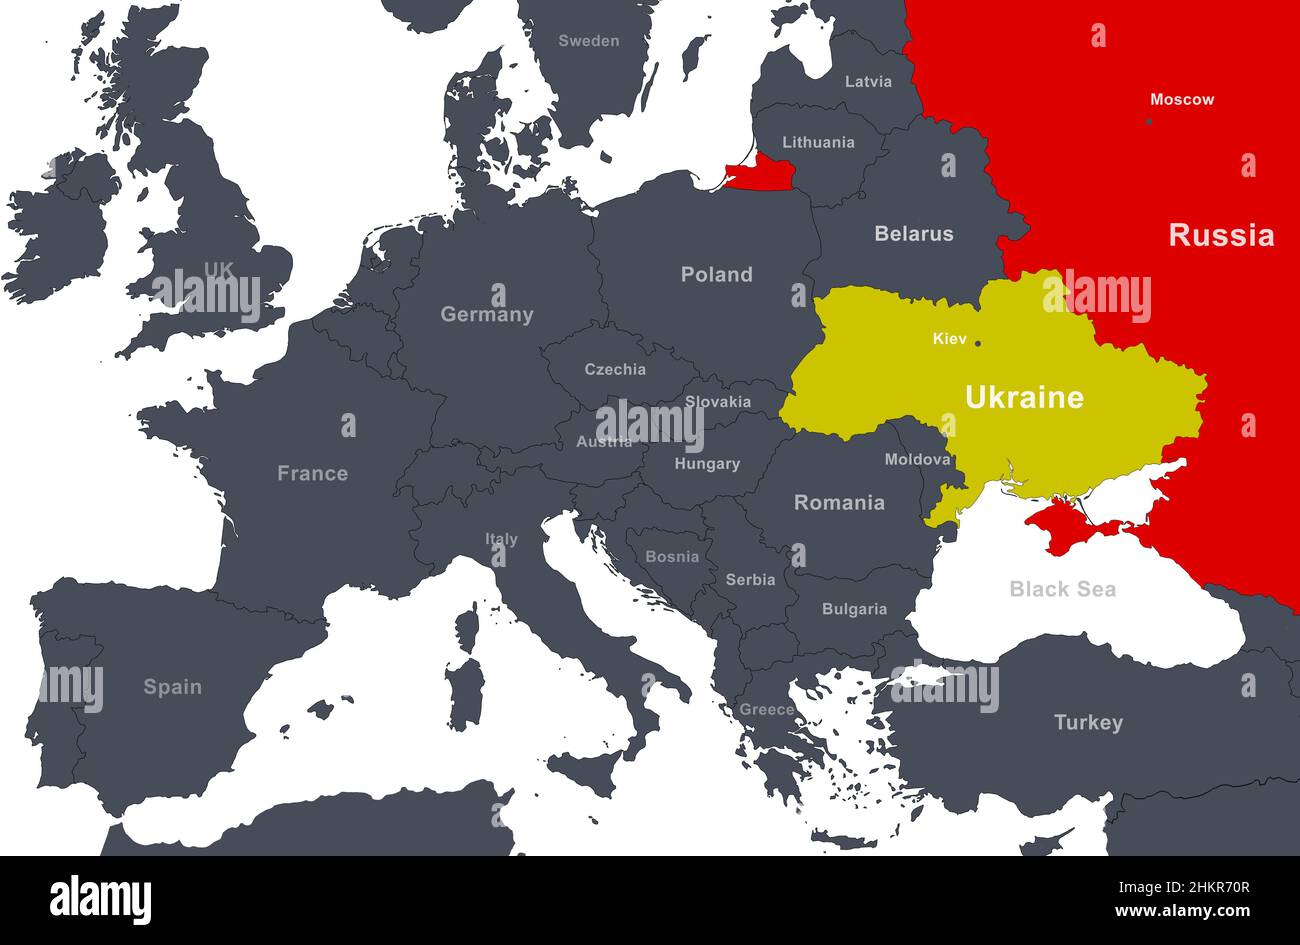 Russia and Ukraine on Europe outline map. Ukraine territory and Russian border on political map with Belarus, Poland and other countries. Black Sea wi Stock Photo